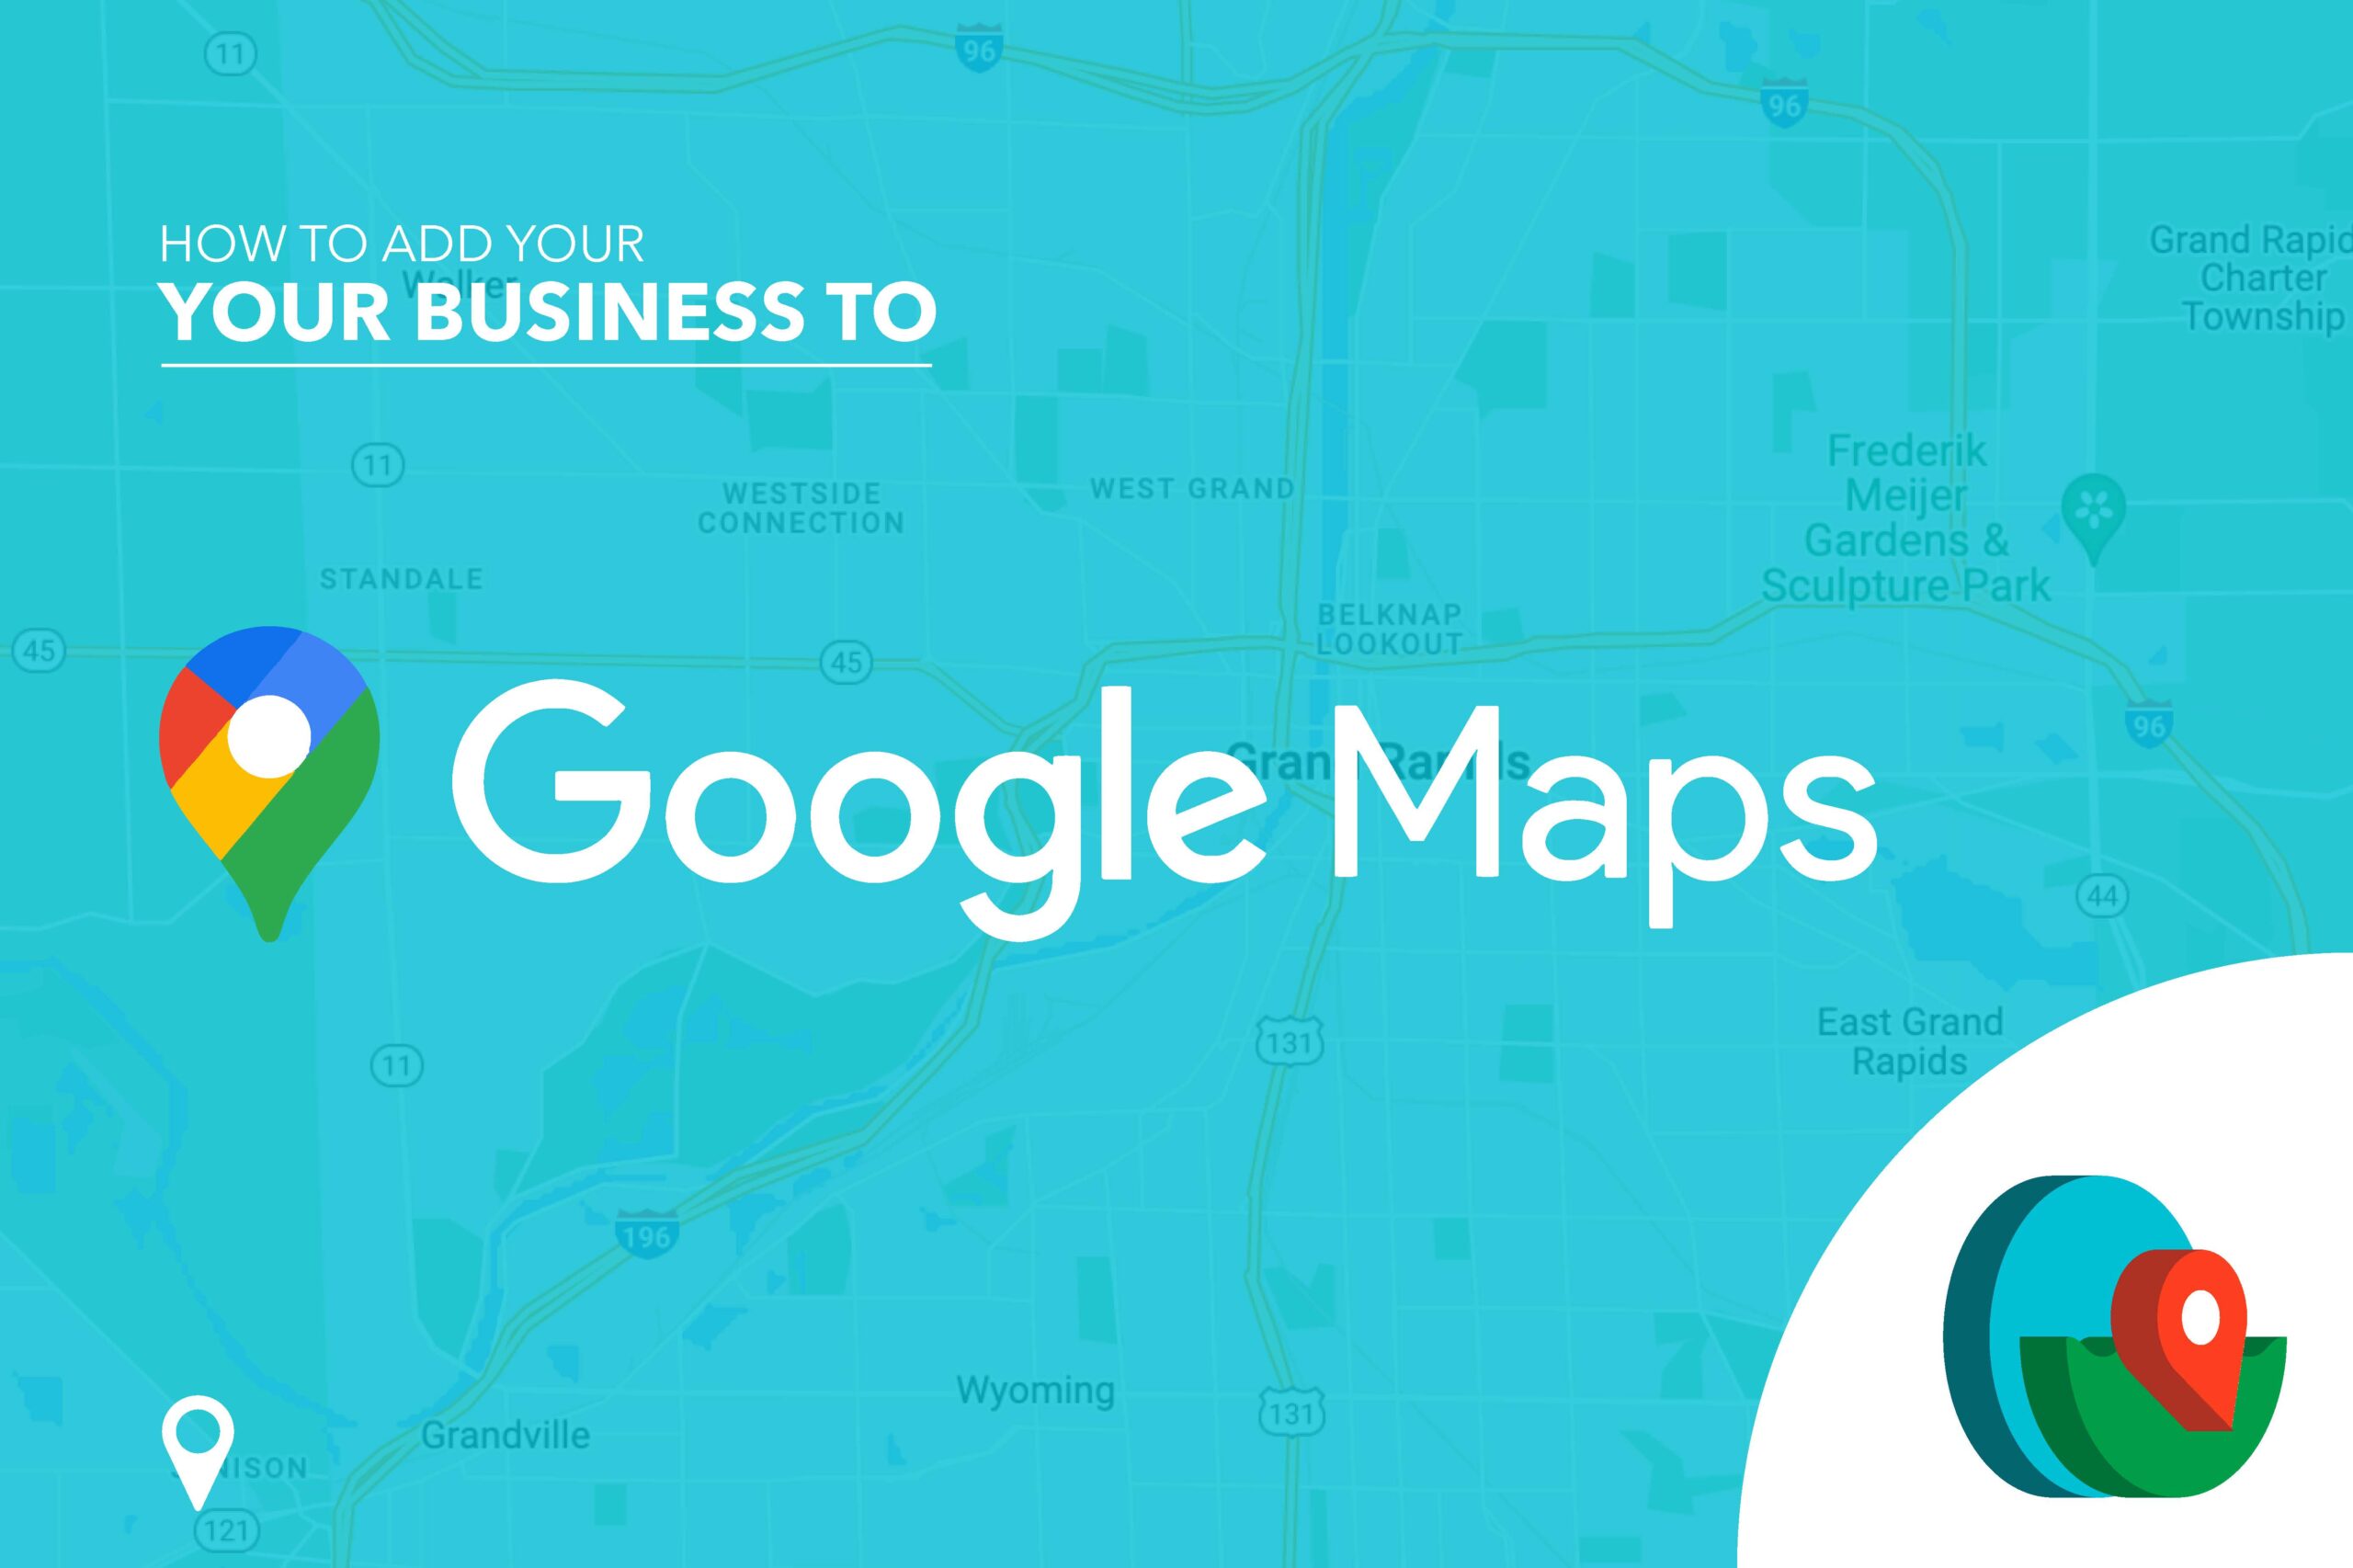 How to add your business to Google Maps.